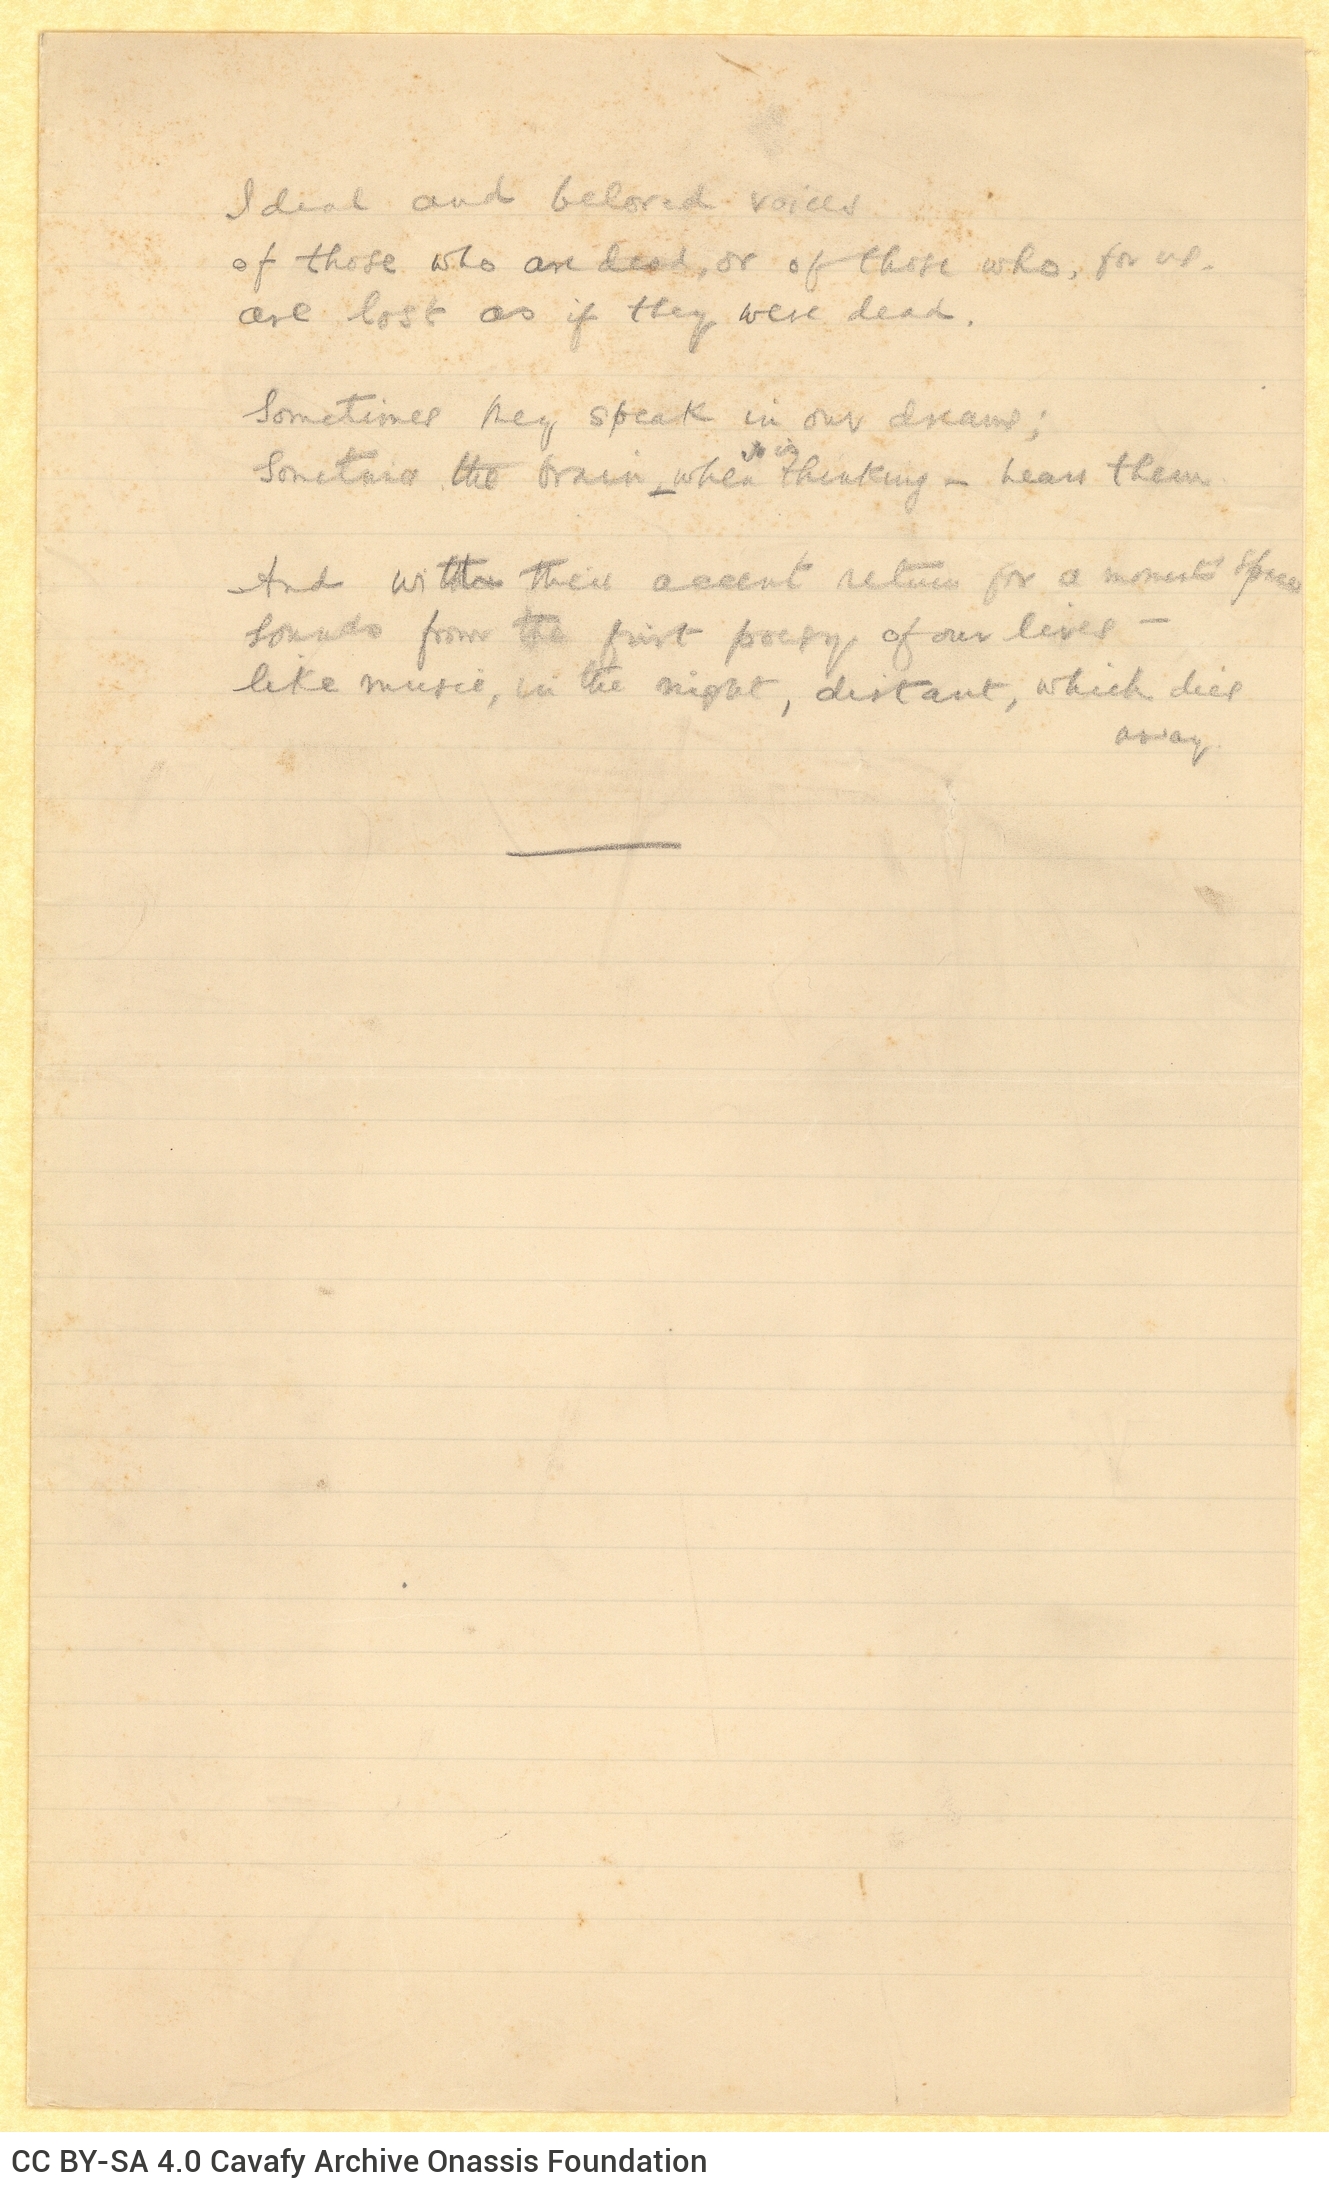 Handwritten text in English in the first page of a double sheet notepaper. It is a translation of a poem by Cavafy ("Voice